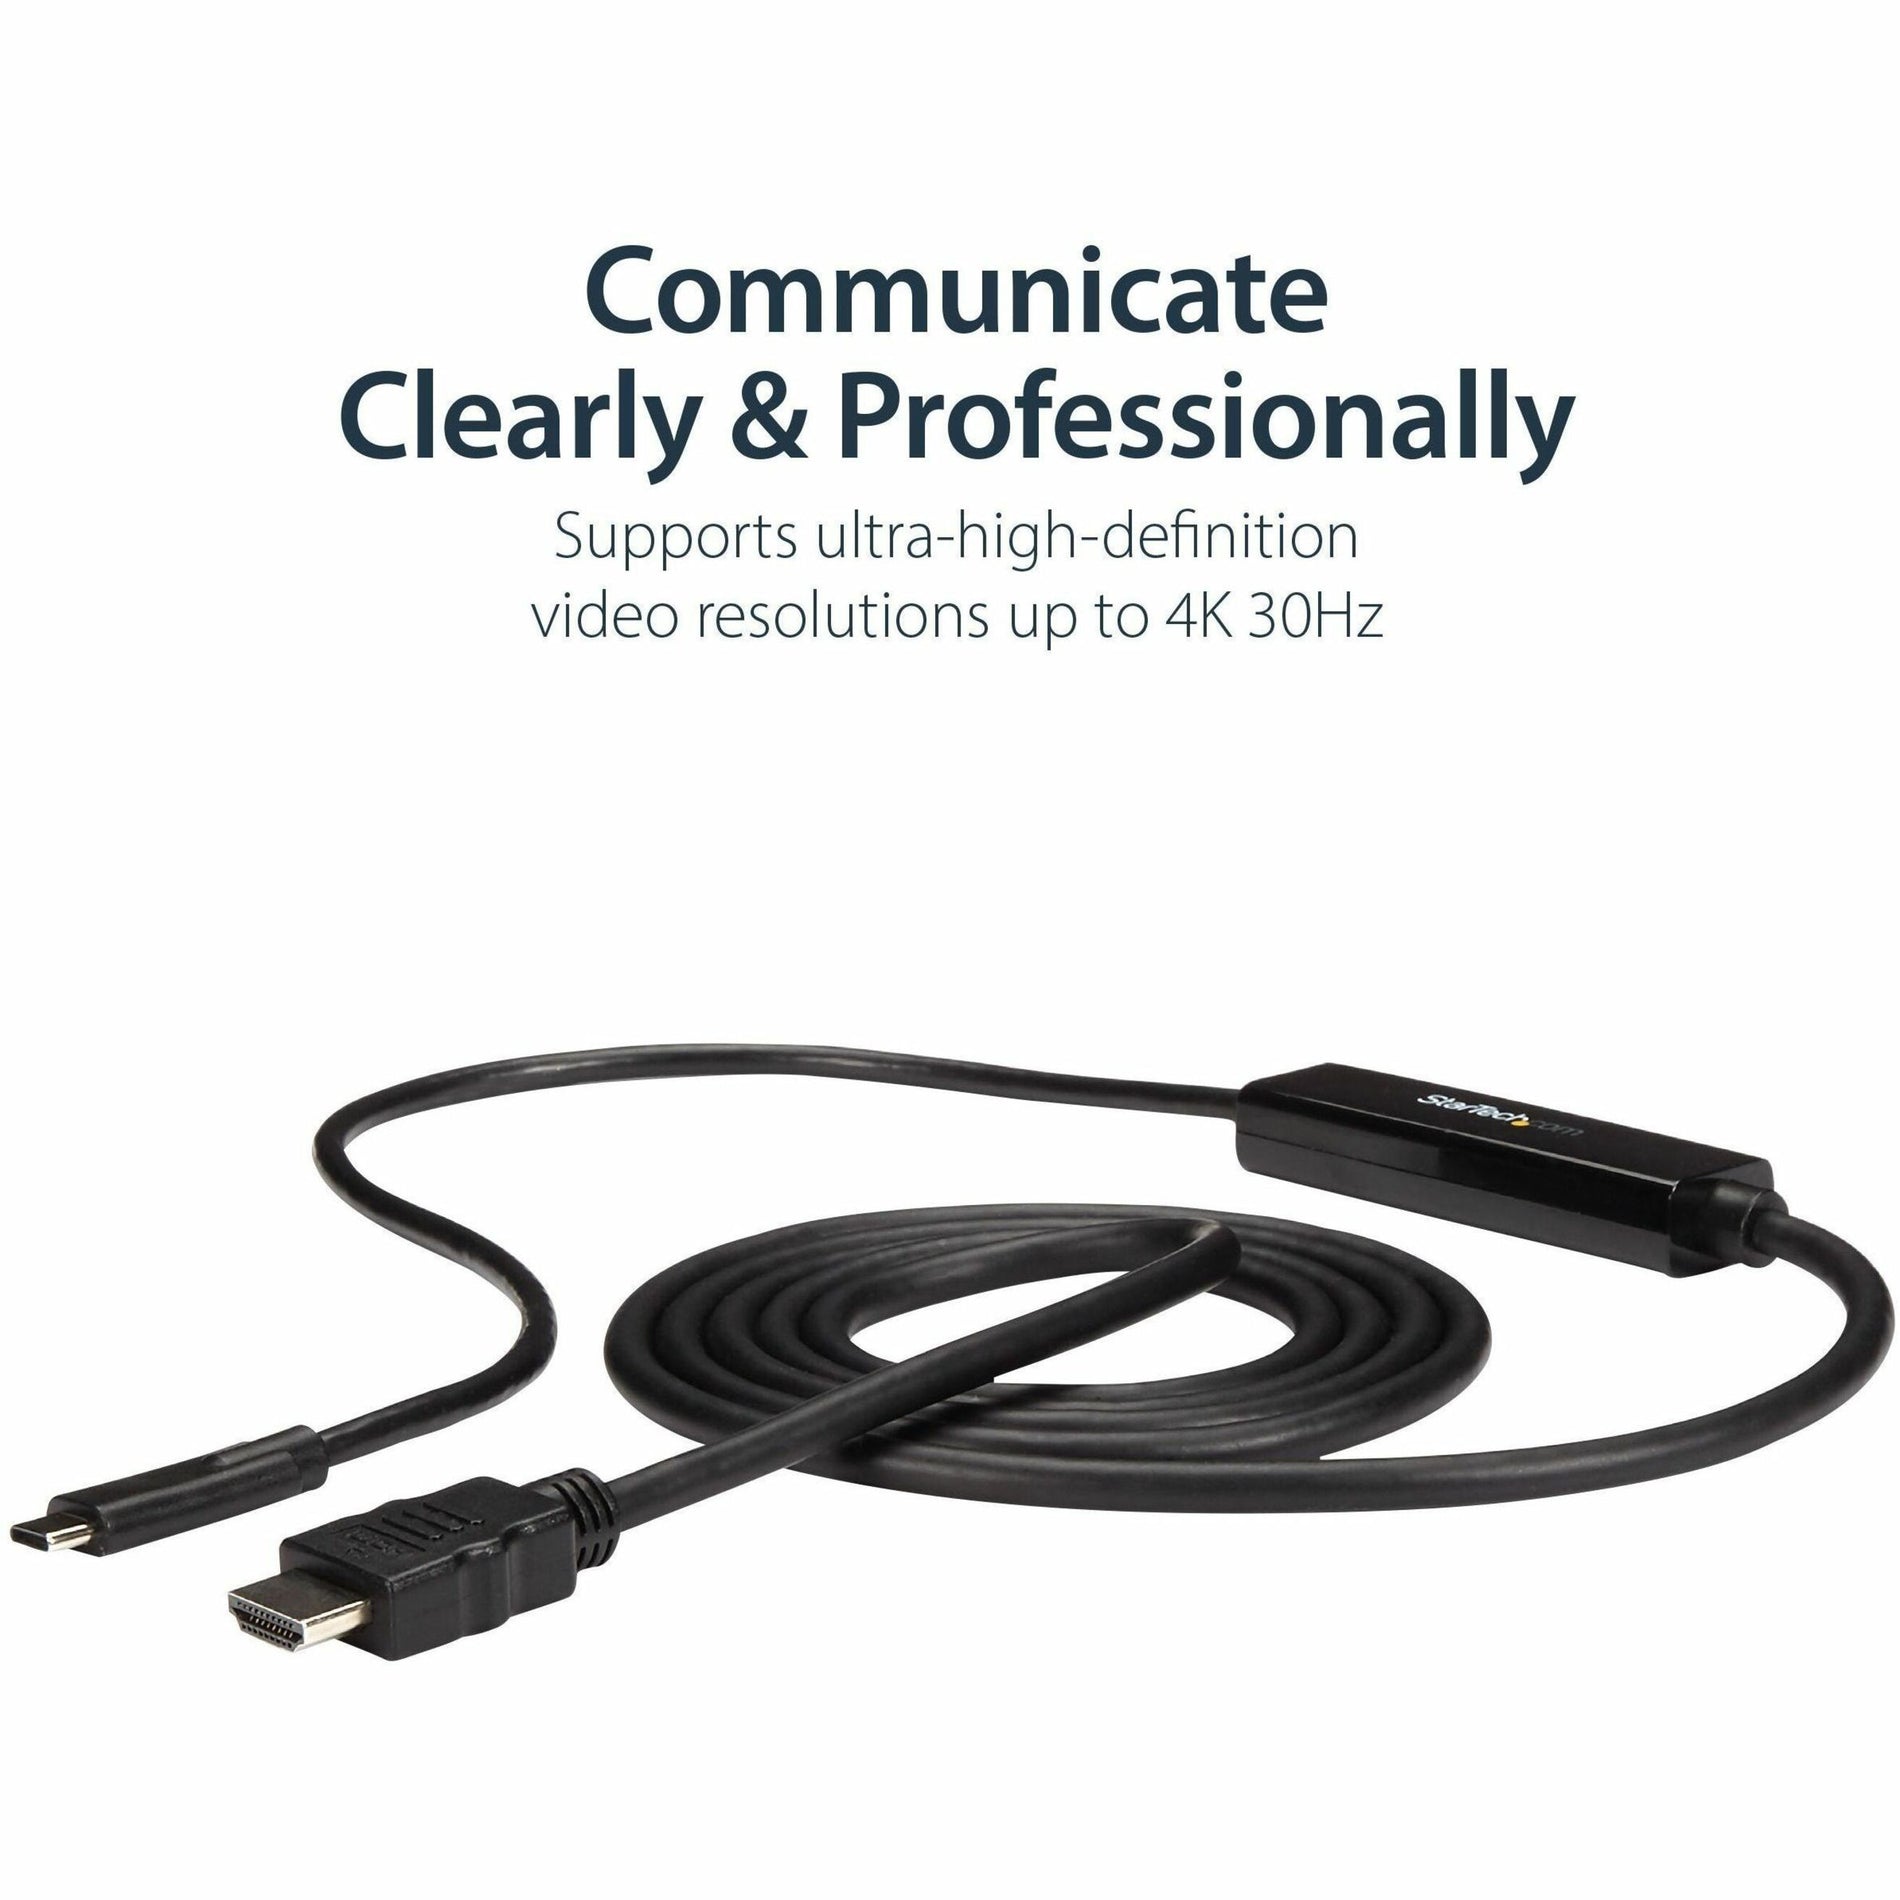 StarTech.com CDP2HDMM2MB USB-C to HDMI Adapter Cable - 2m (6 ft.) - 4K at 30 Hz, Plug & Play, Reversible